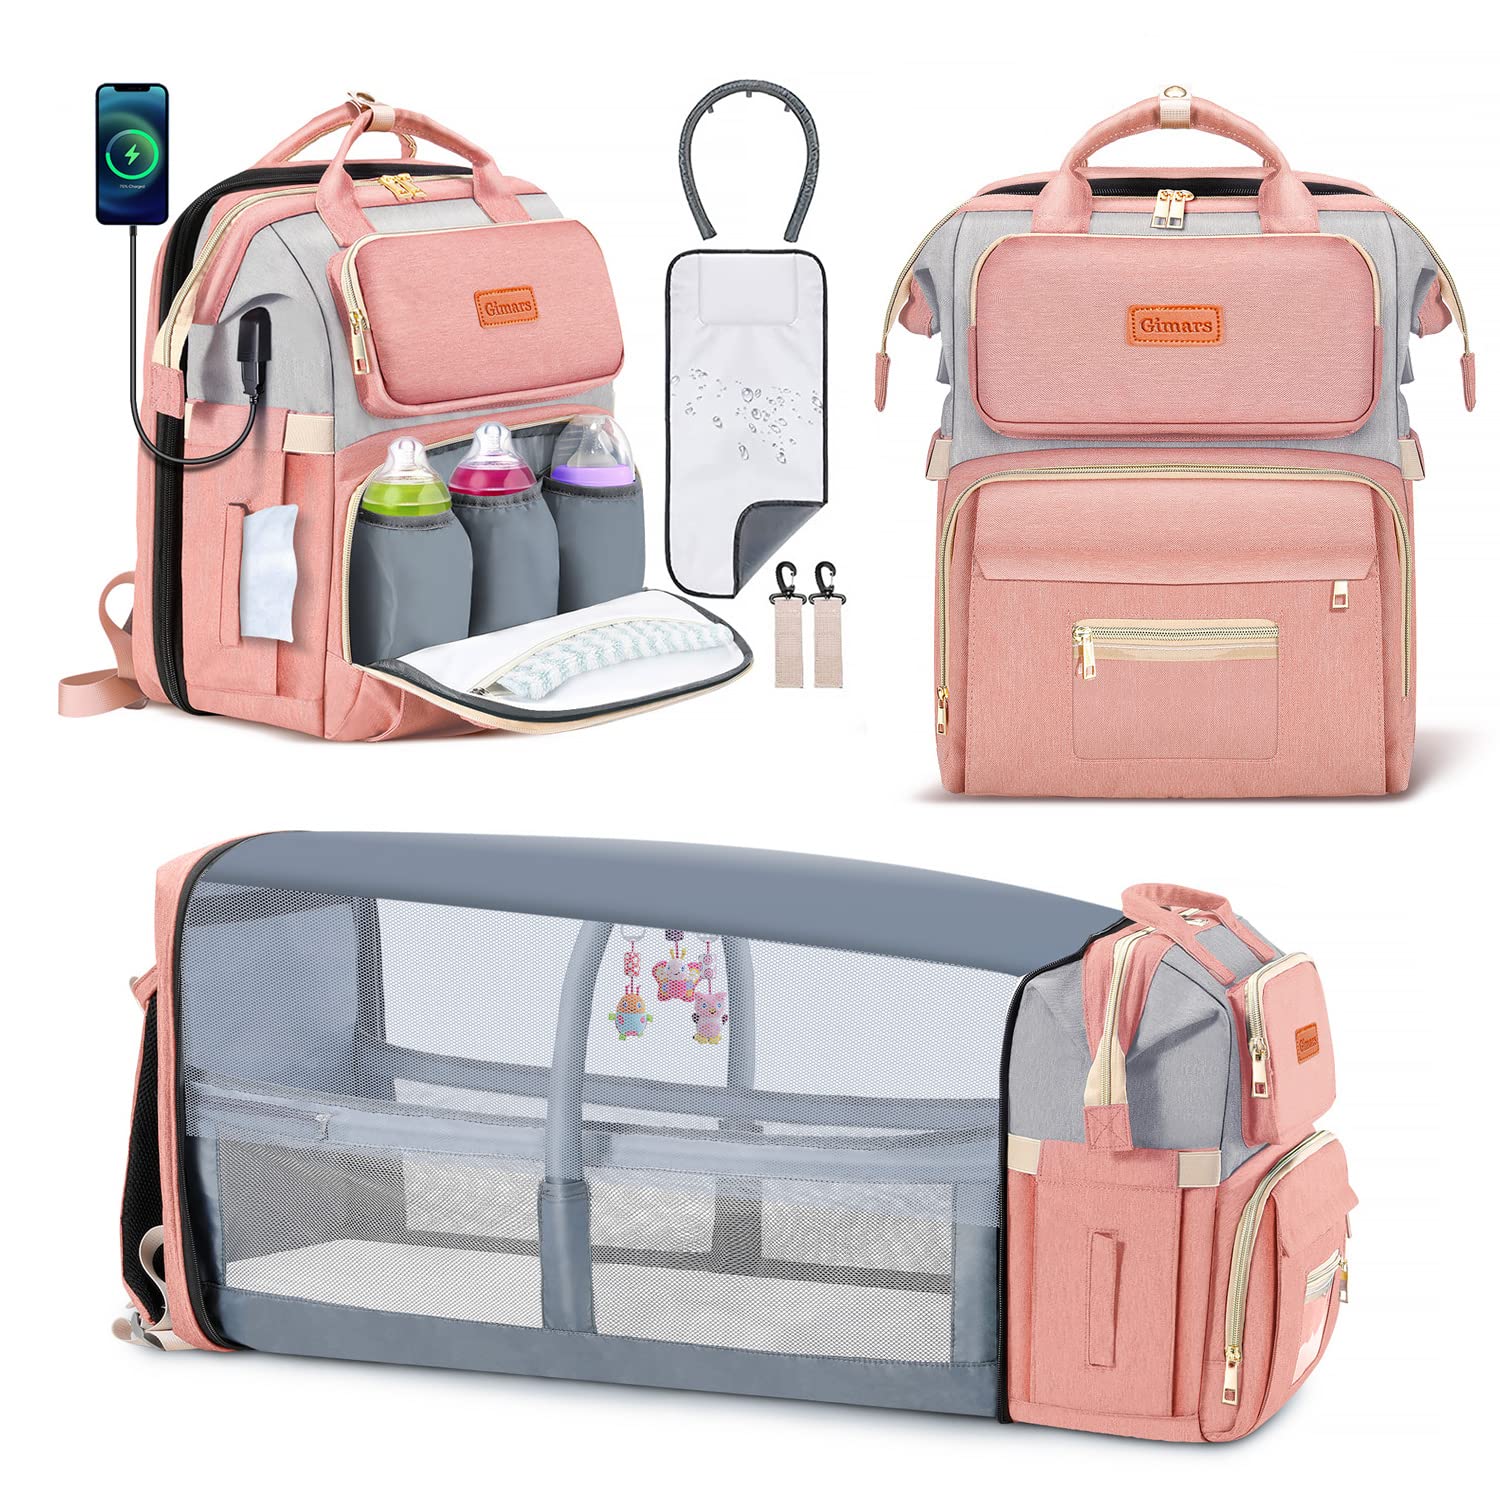 Diaper Bag Backpack, Portable Travel Mommy Bag with Changing Station,  Multi-Function Baby Bassinet Crib Diaper Backpack with Foldable Crib